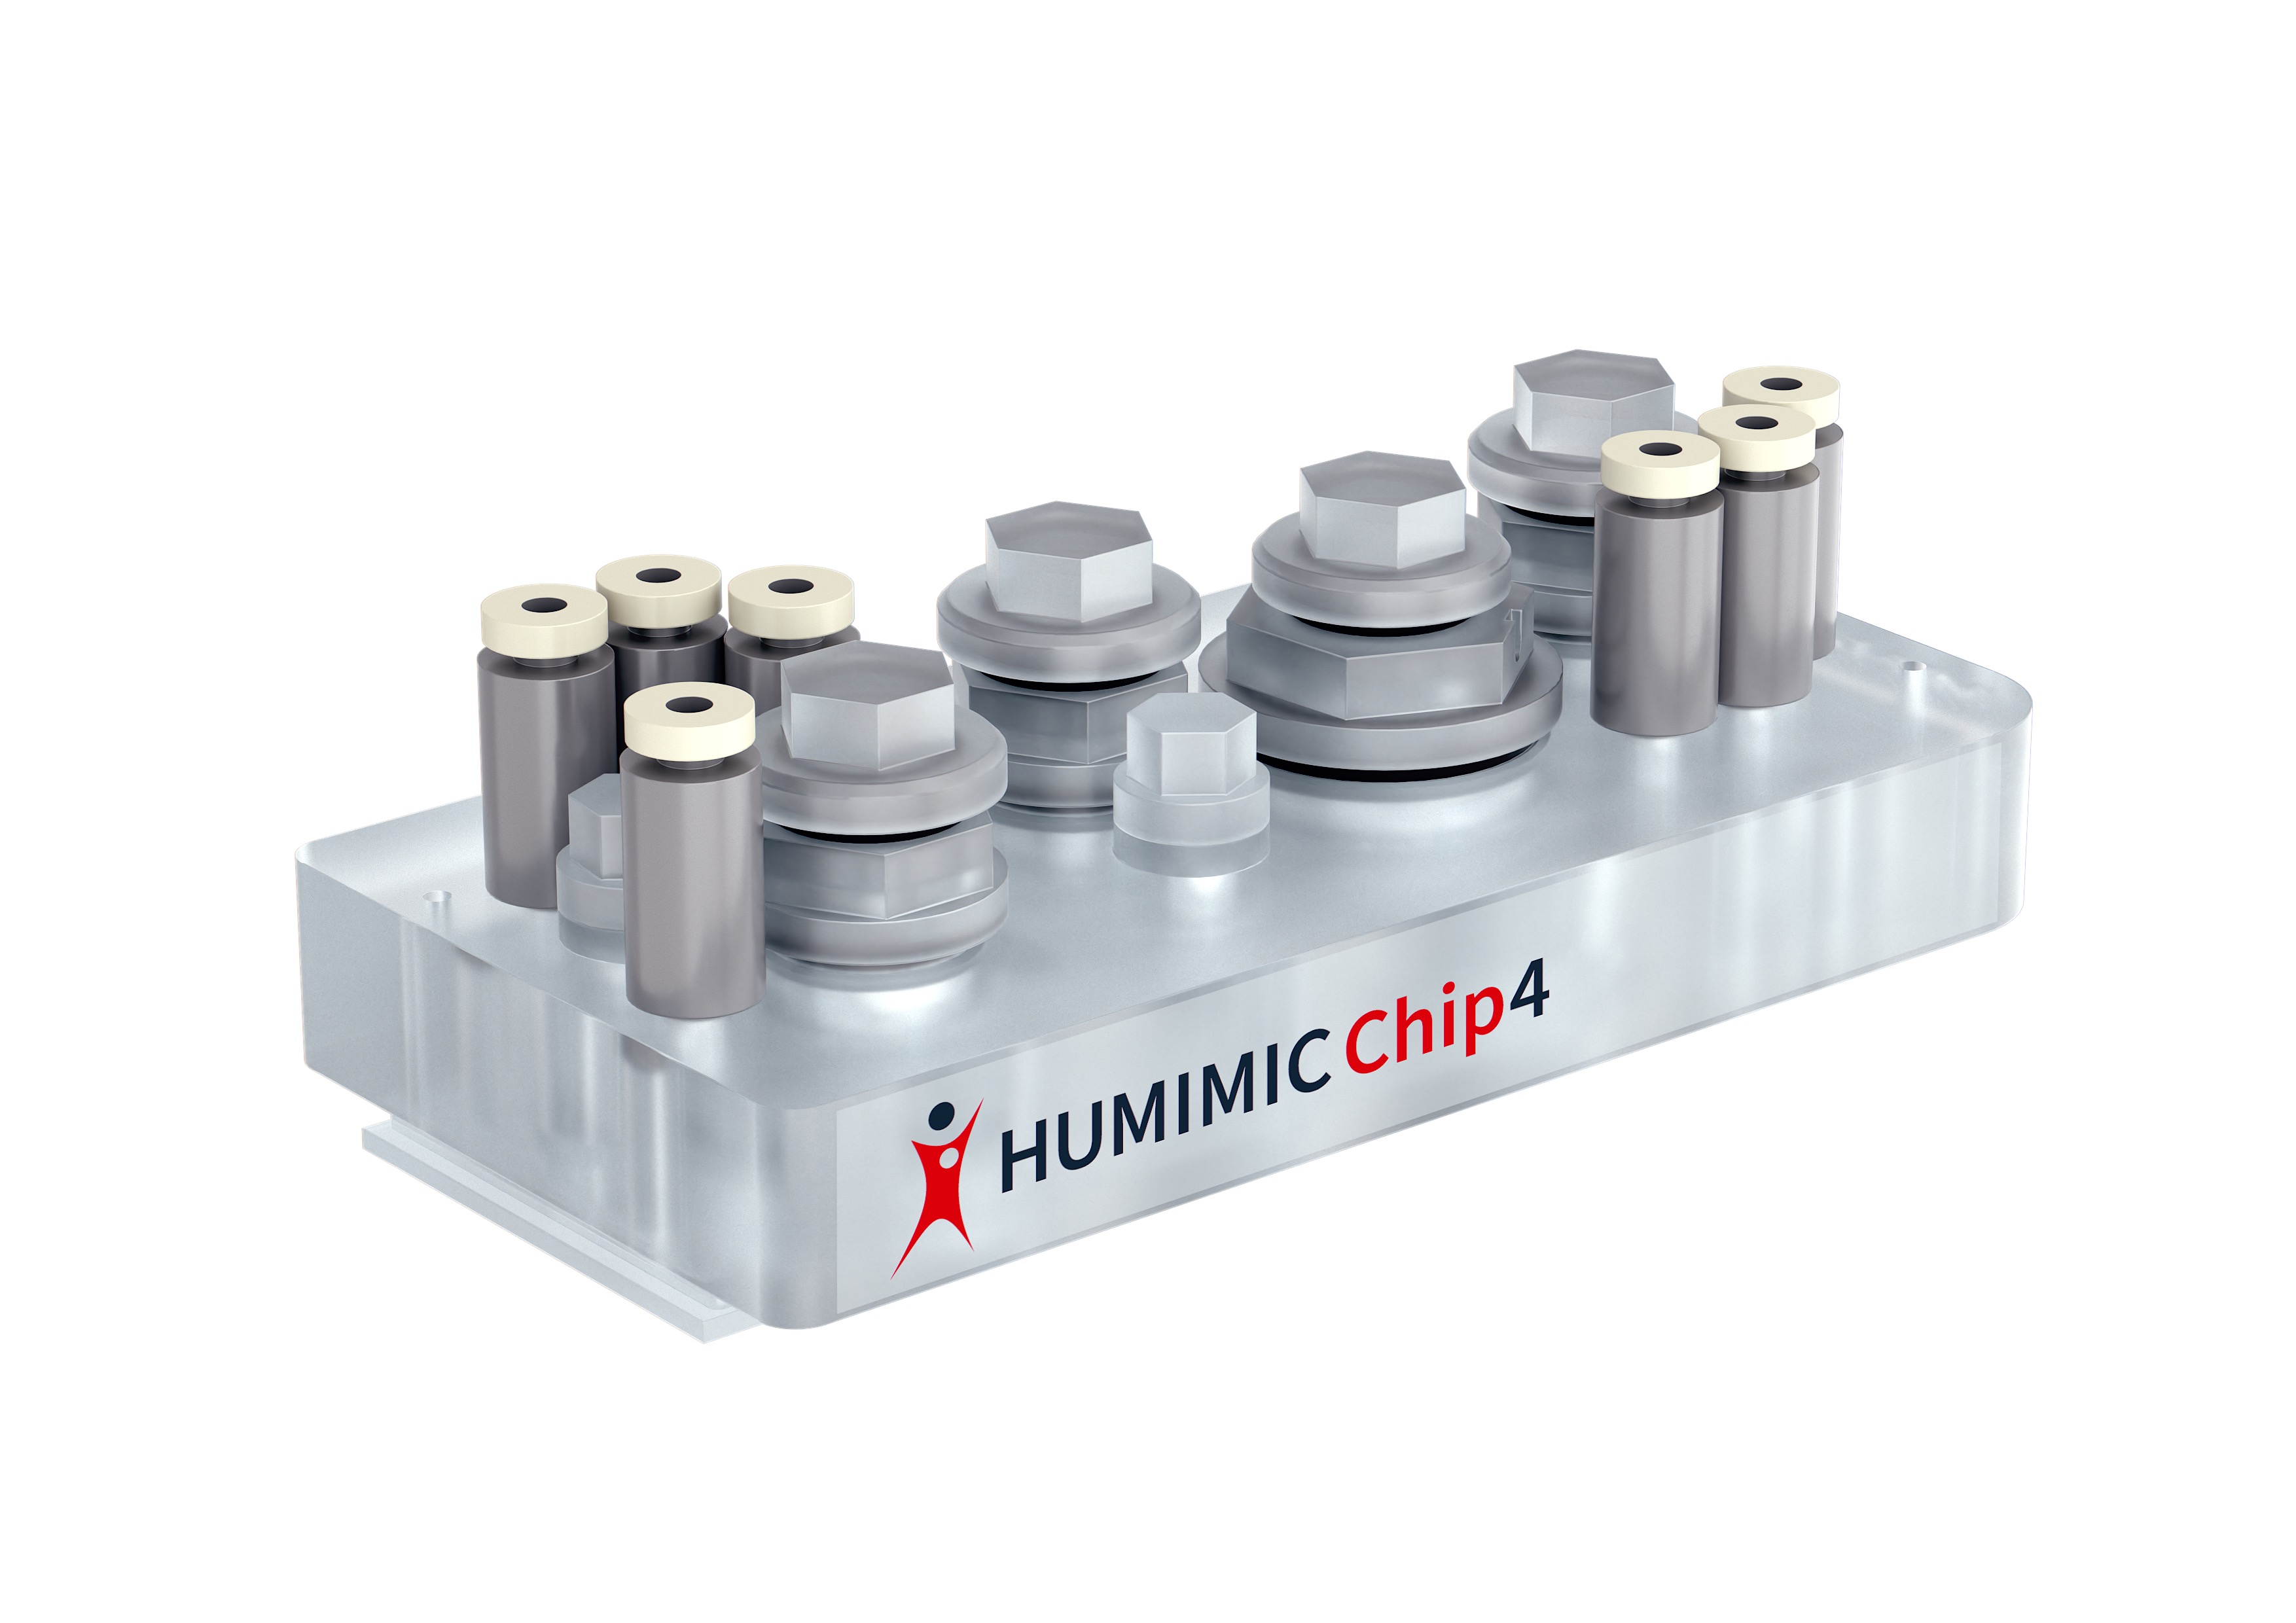 HUMIMIC Chip4 The HUMIMIC Chip 4 enables easy integration of up to four different organ models, e. g. a combination of intestine, liver, kidney and neuronal tissue in one system.